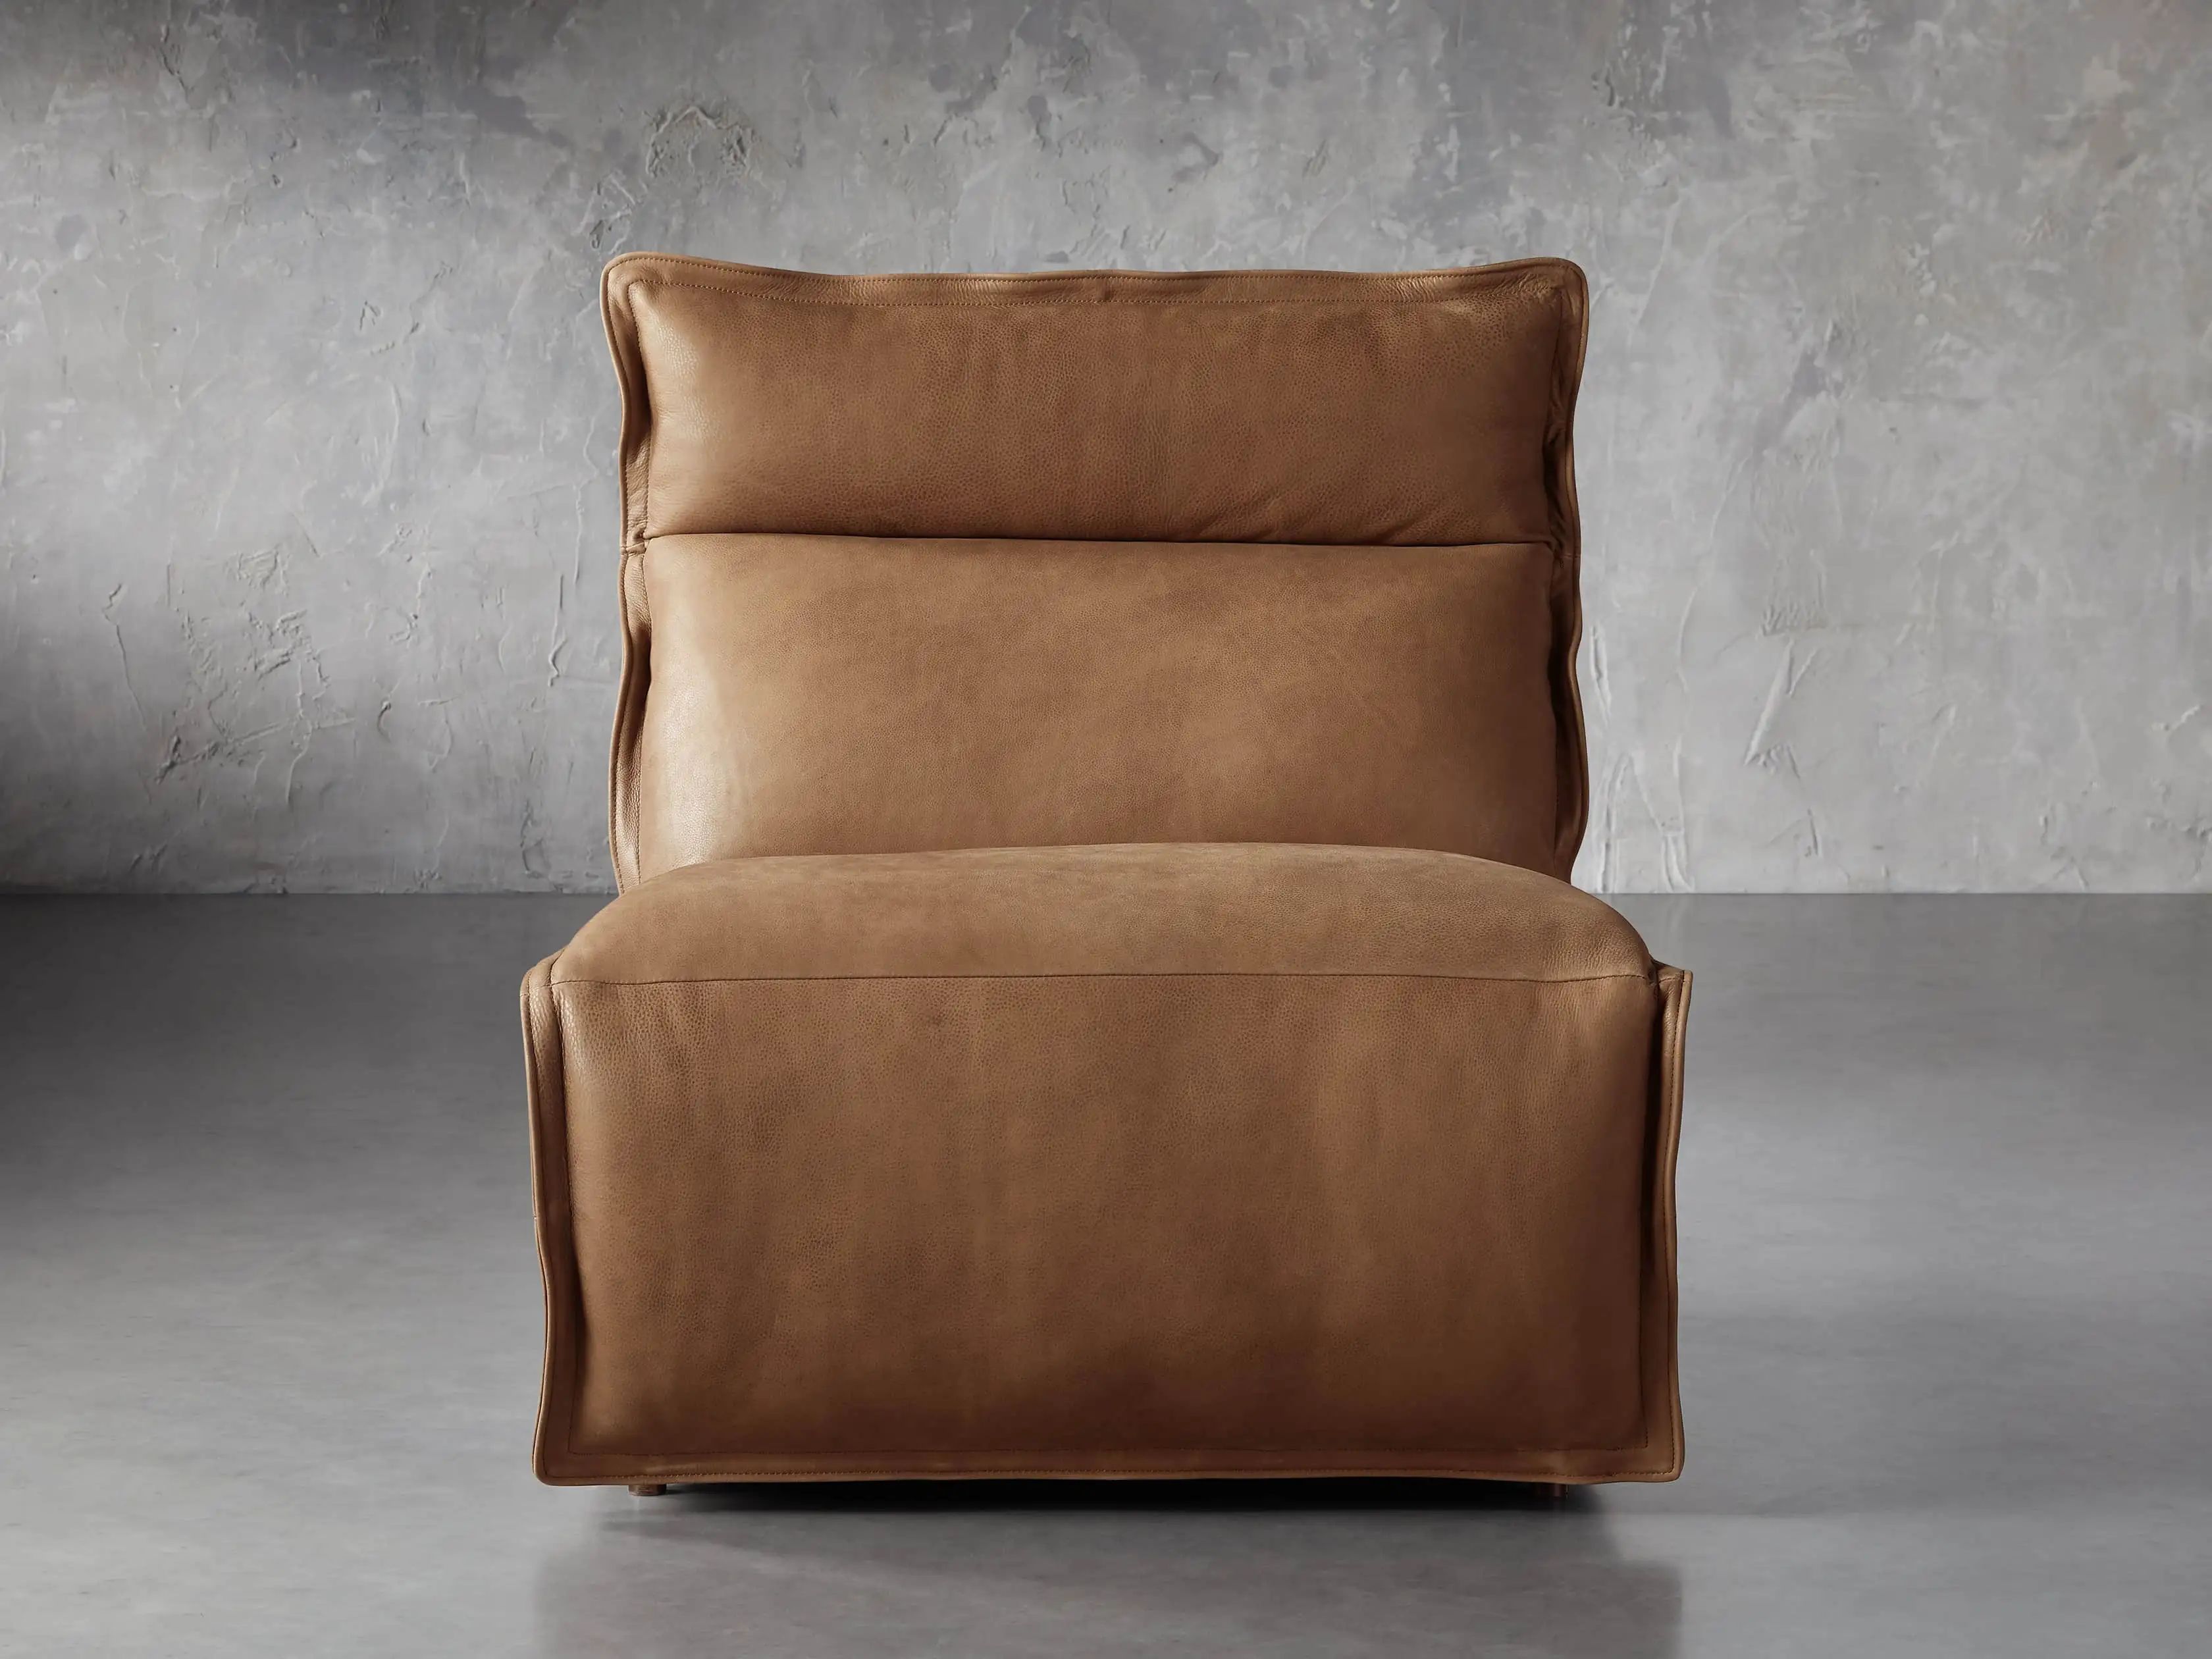 Rowland Leather High-Back Armless Motion Recliner | Arhaus